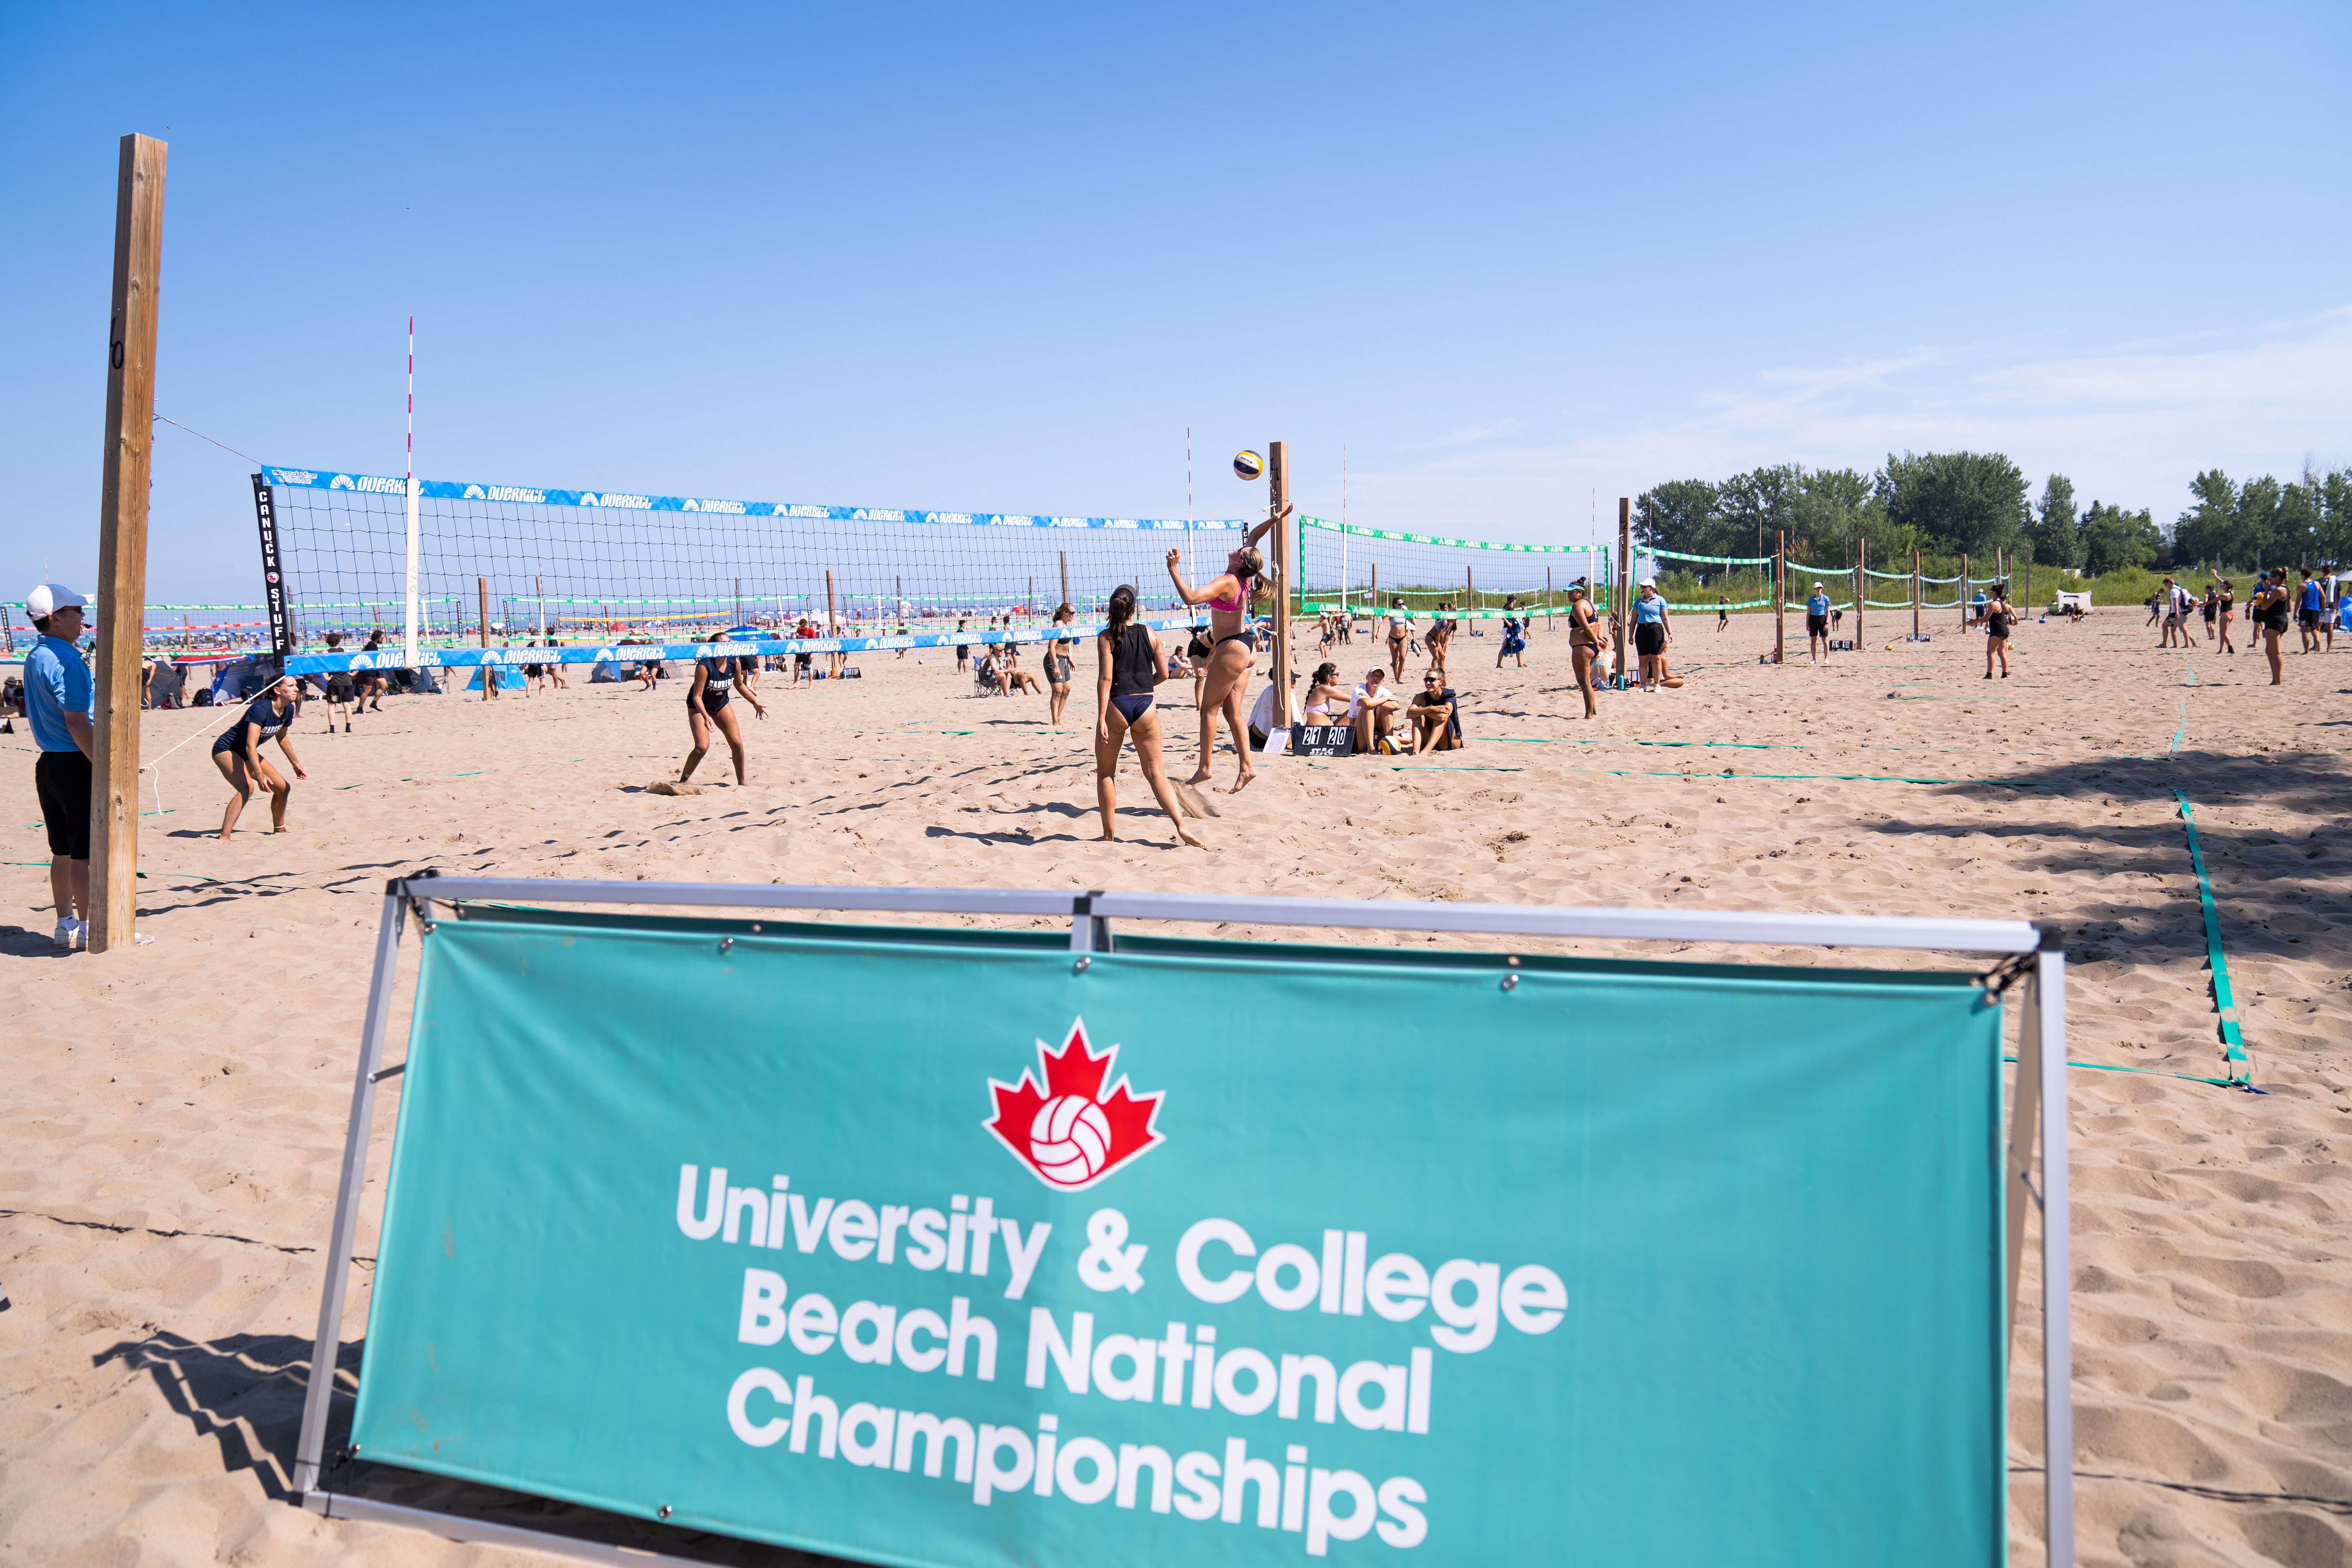 https://volleyball.ca/uploads/Competitions/Nationals/2023/Images/DSC05957.jpg